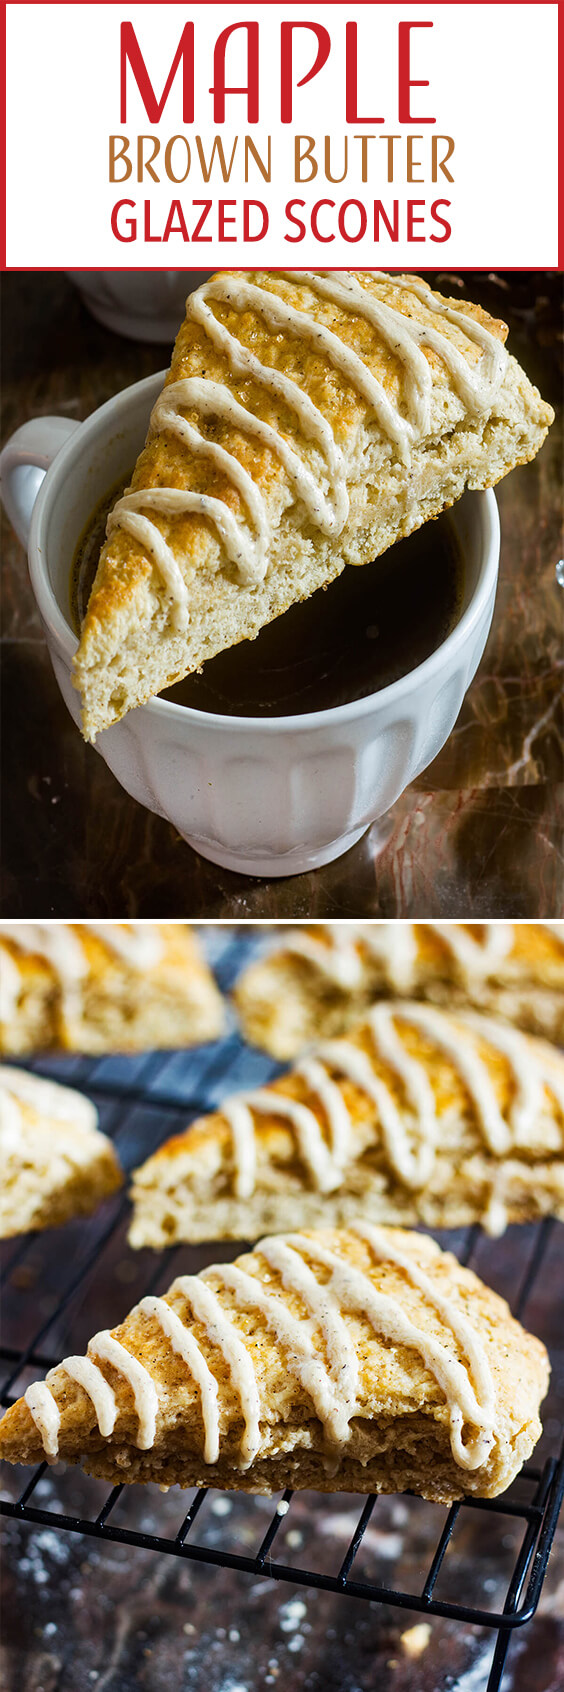 These Maple Brown Butter Glazed Scones are simple, delicious, and the ultimate cozy morning treat with a mug of hot coffee.